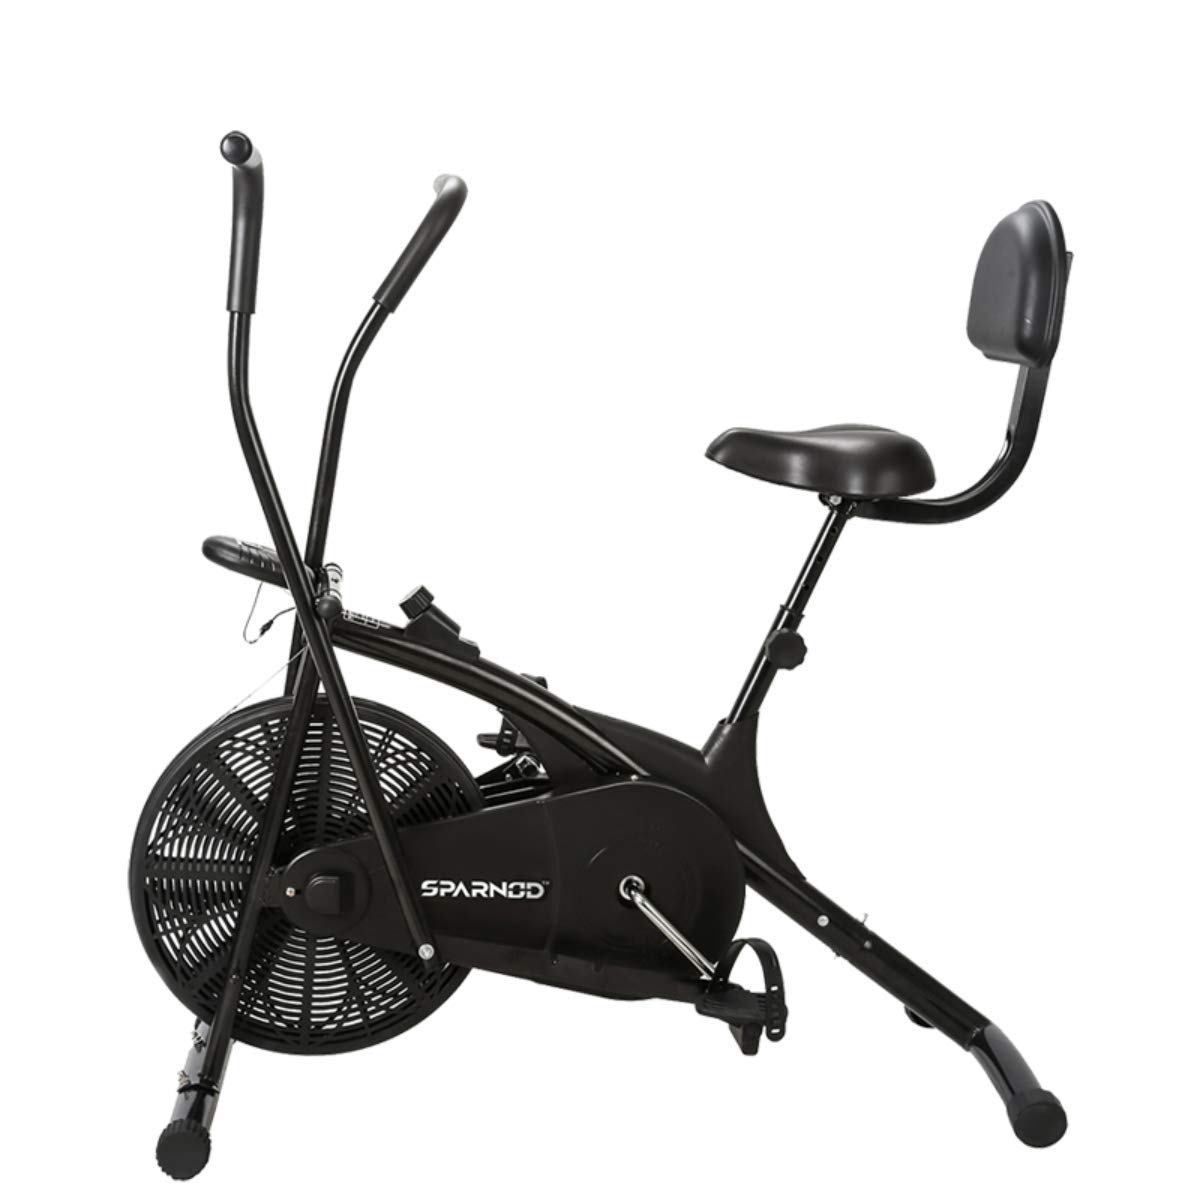 Sparnod Fitness SAB-05 Air Bike Best Exercise Cycle In India